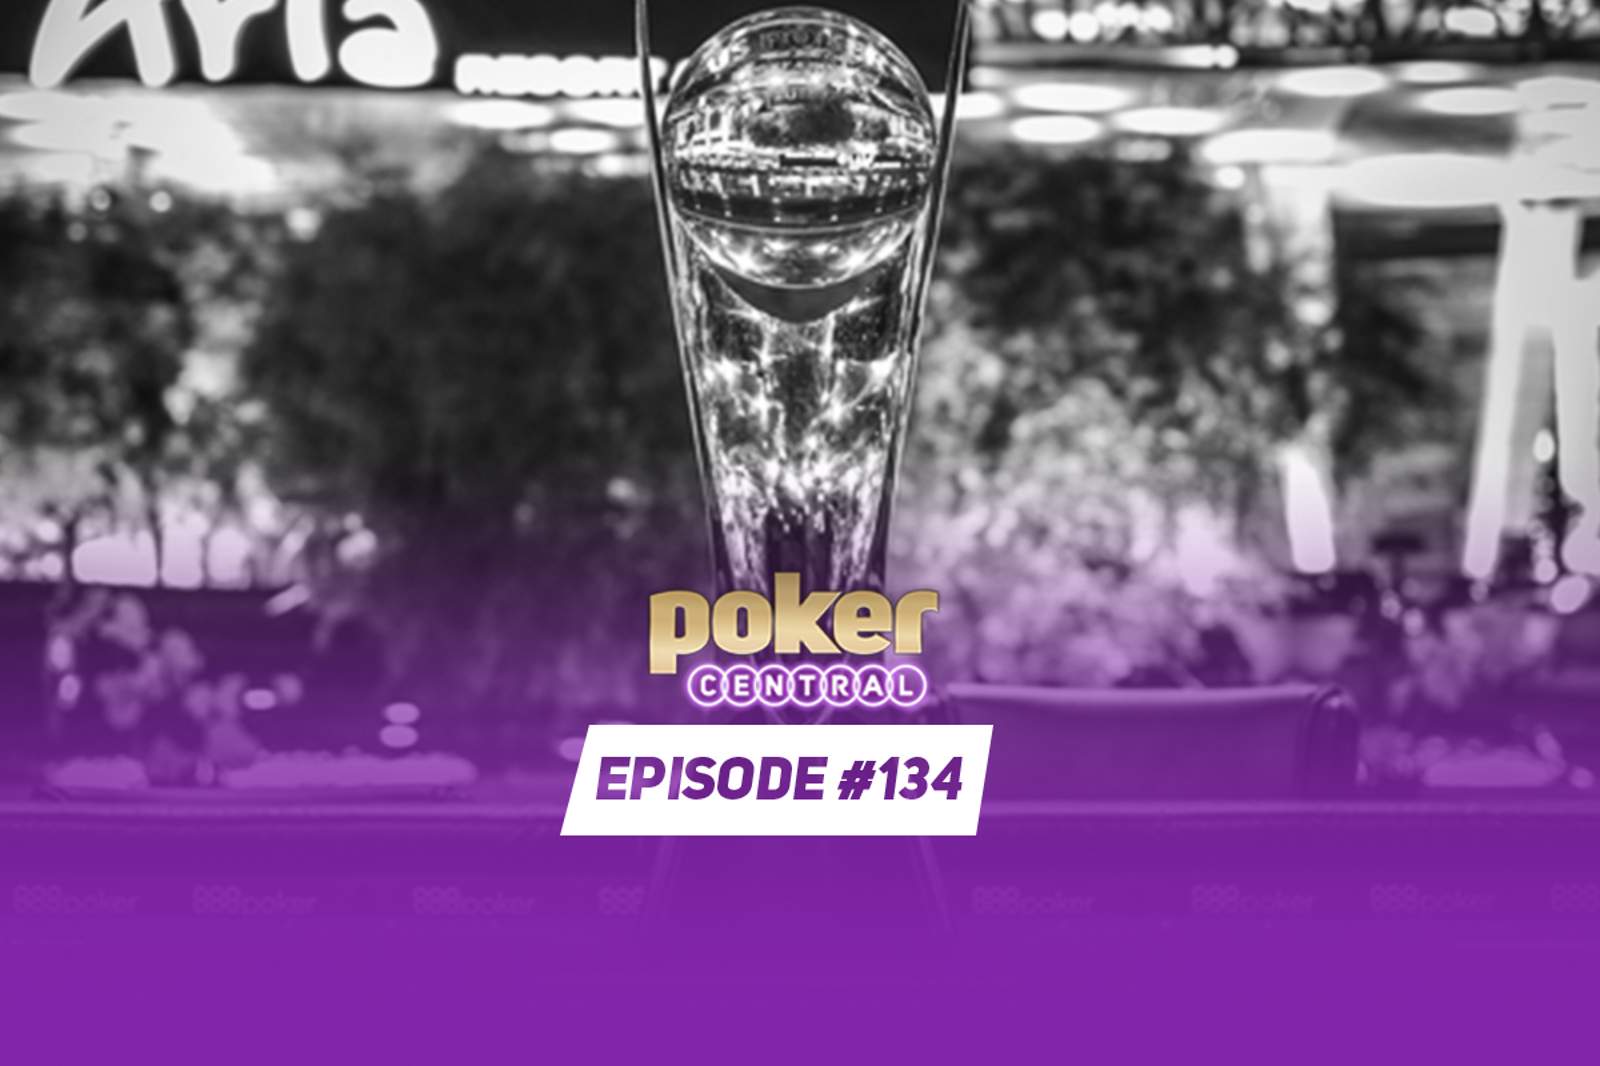 Ep. 134 The 2019 U.S. Poker Open Preview Show!